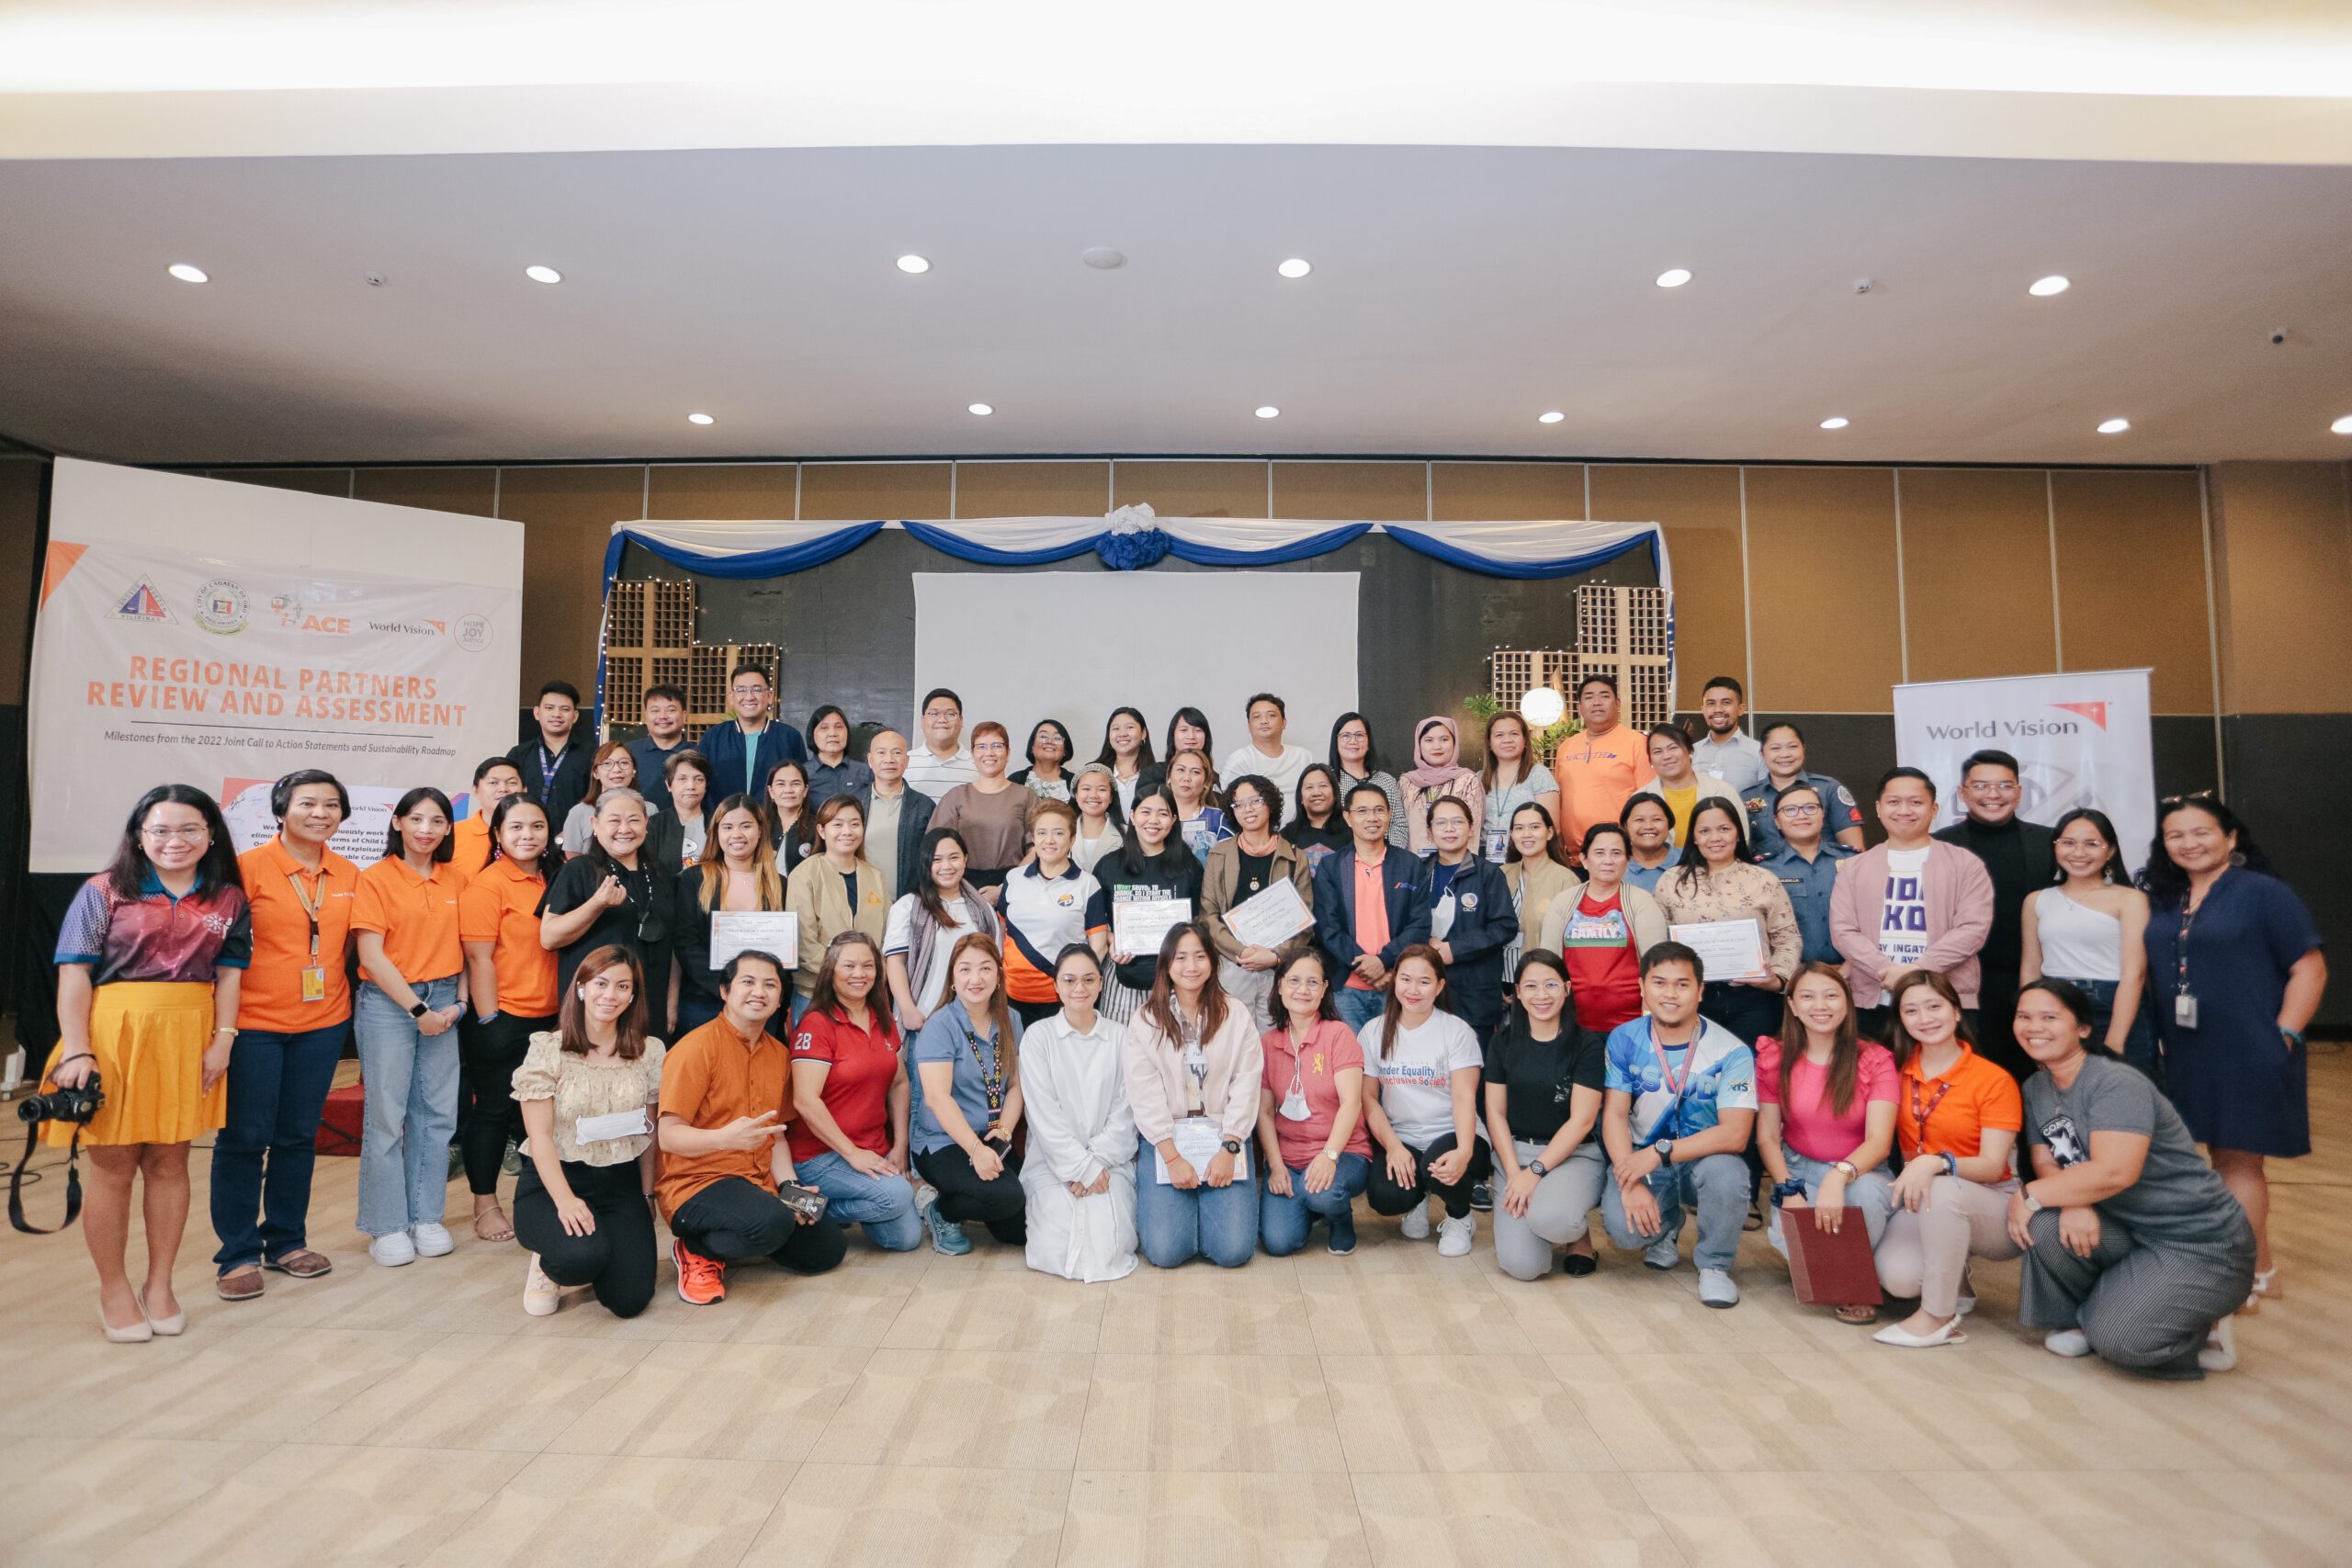 World Vision’s Project ACE, LGU partners, celebrate wins and lessons in CDO